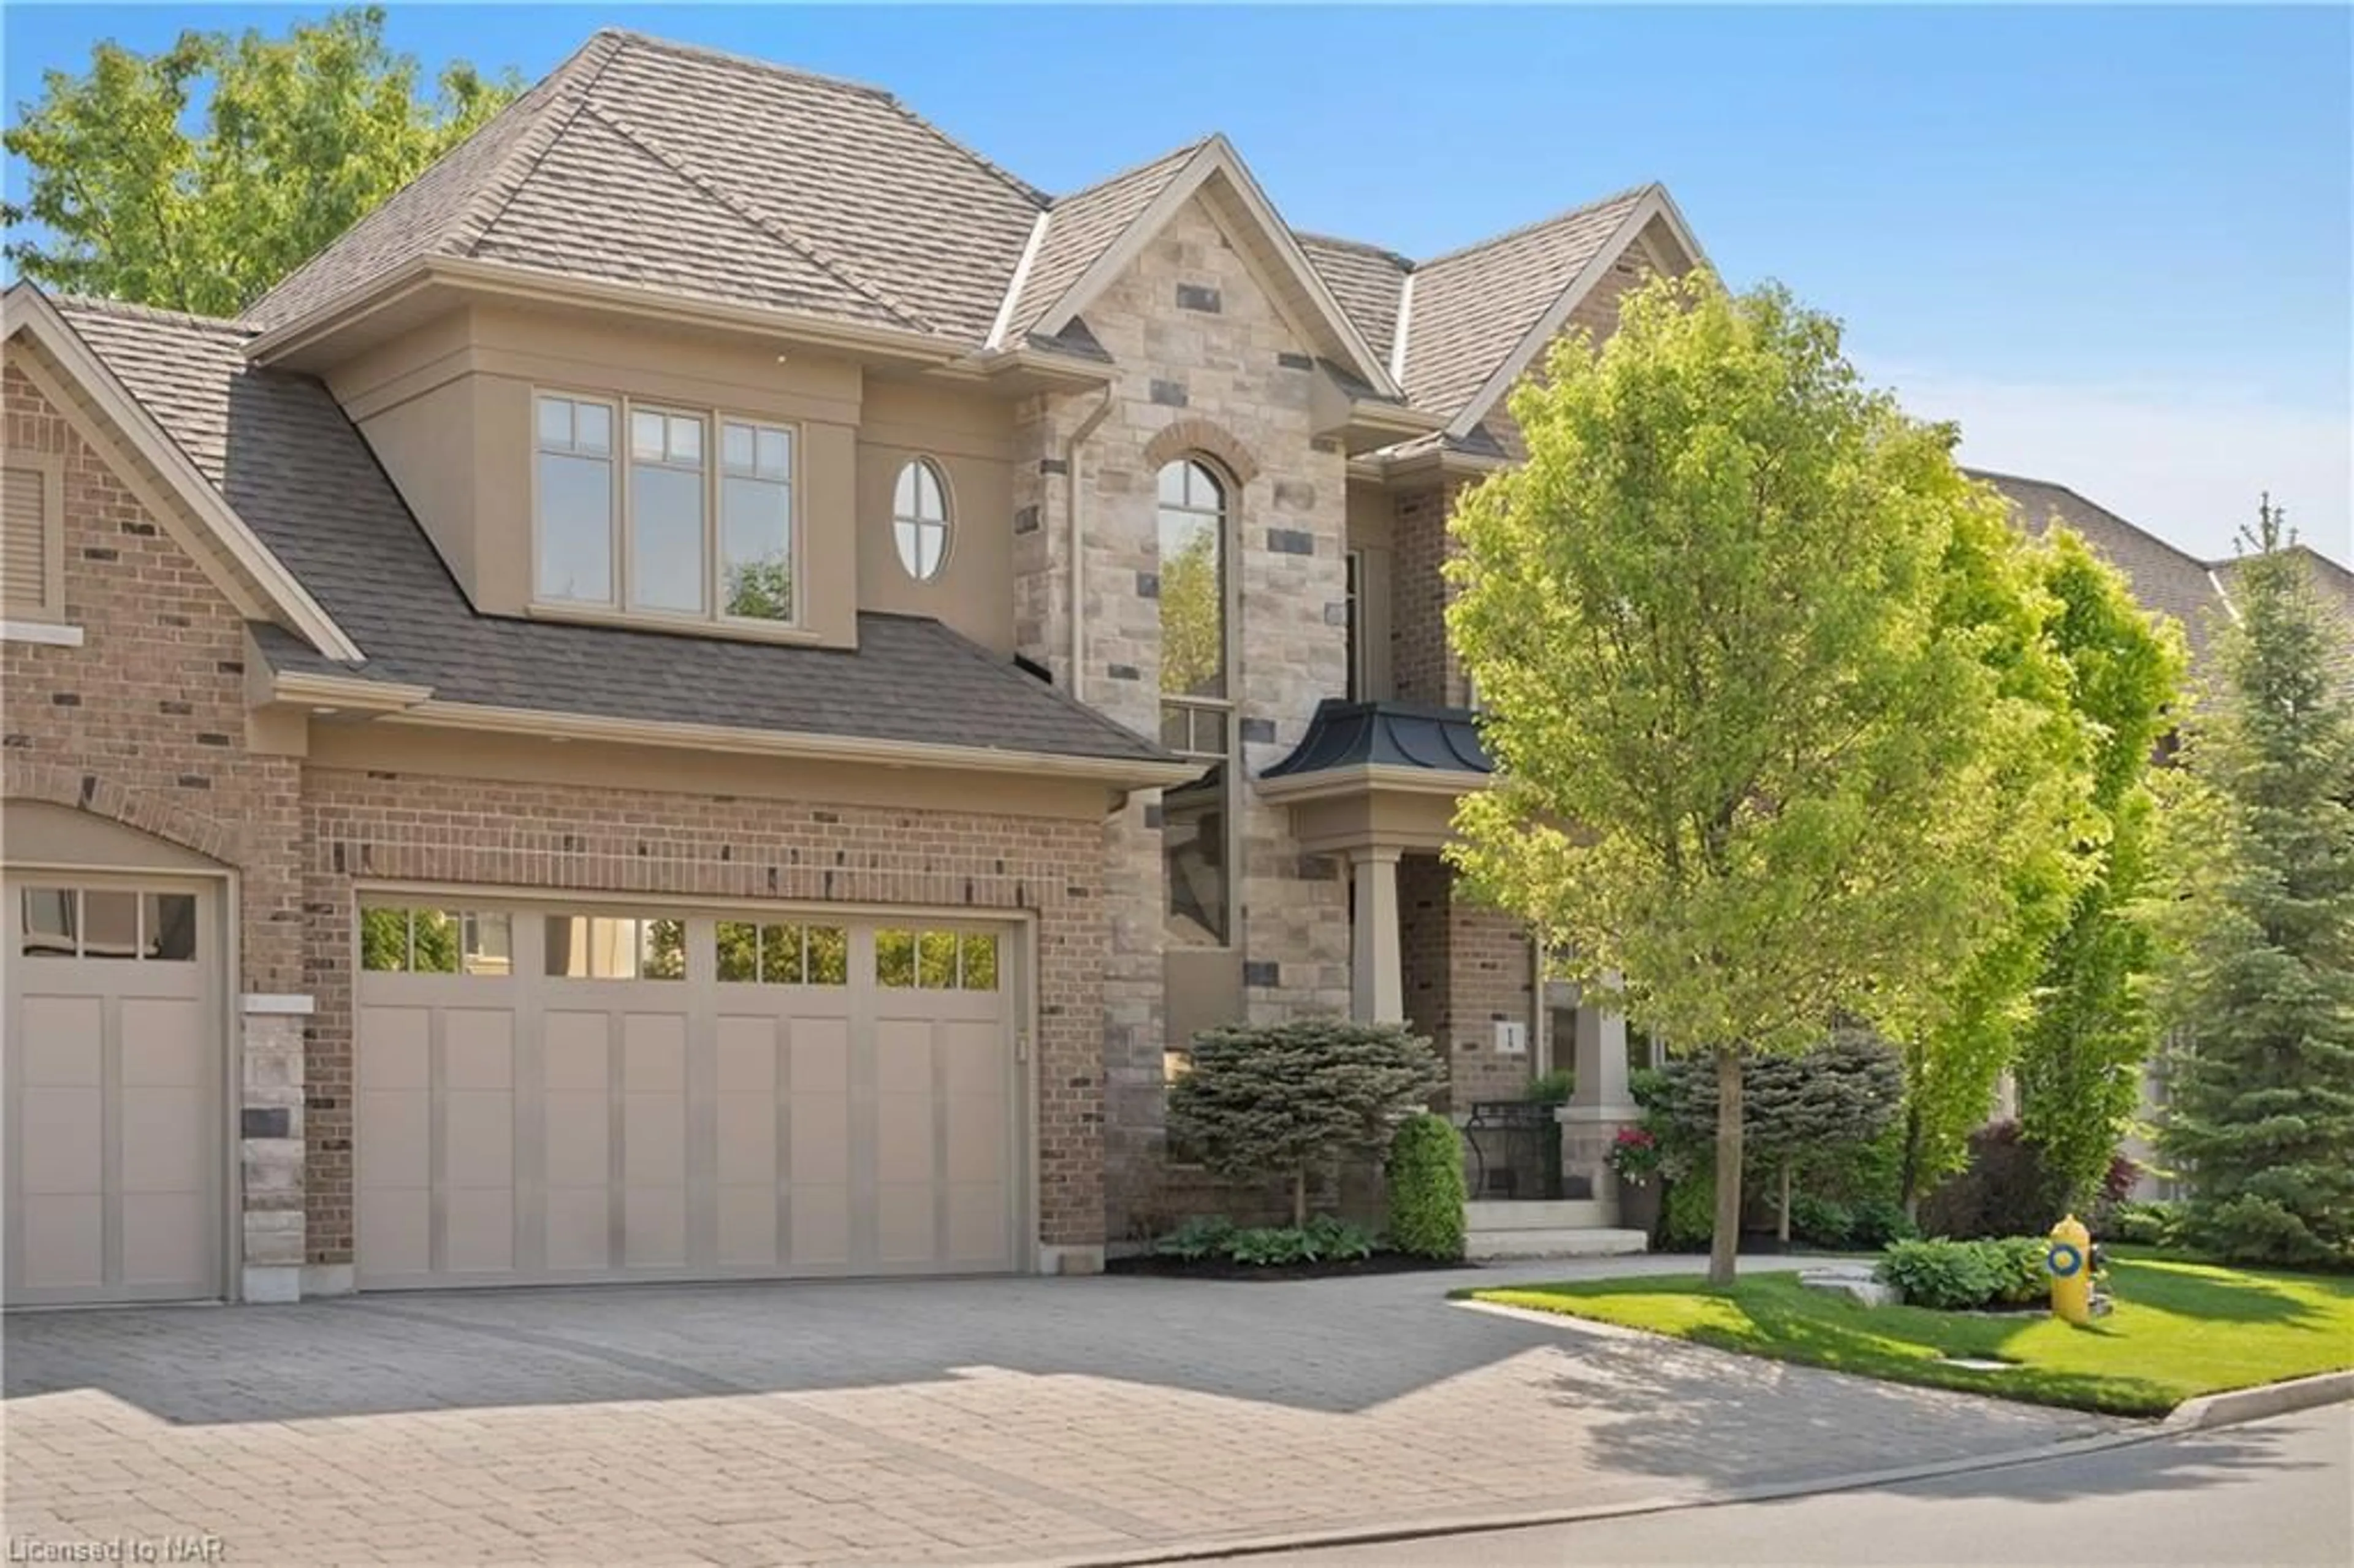 Home with brick exterior material for 1 Evergreen Lane Lane, Niagara-on-the-Lake Ontario L0S 1J0